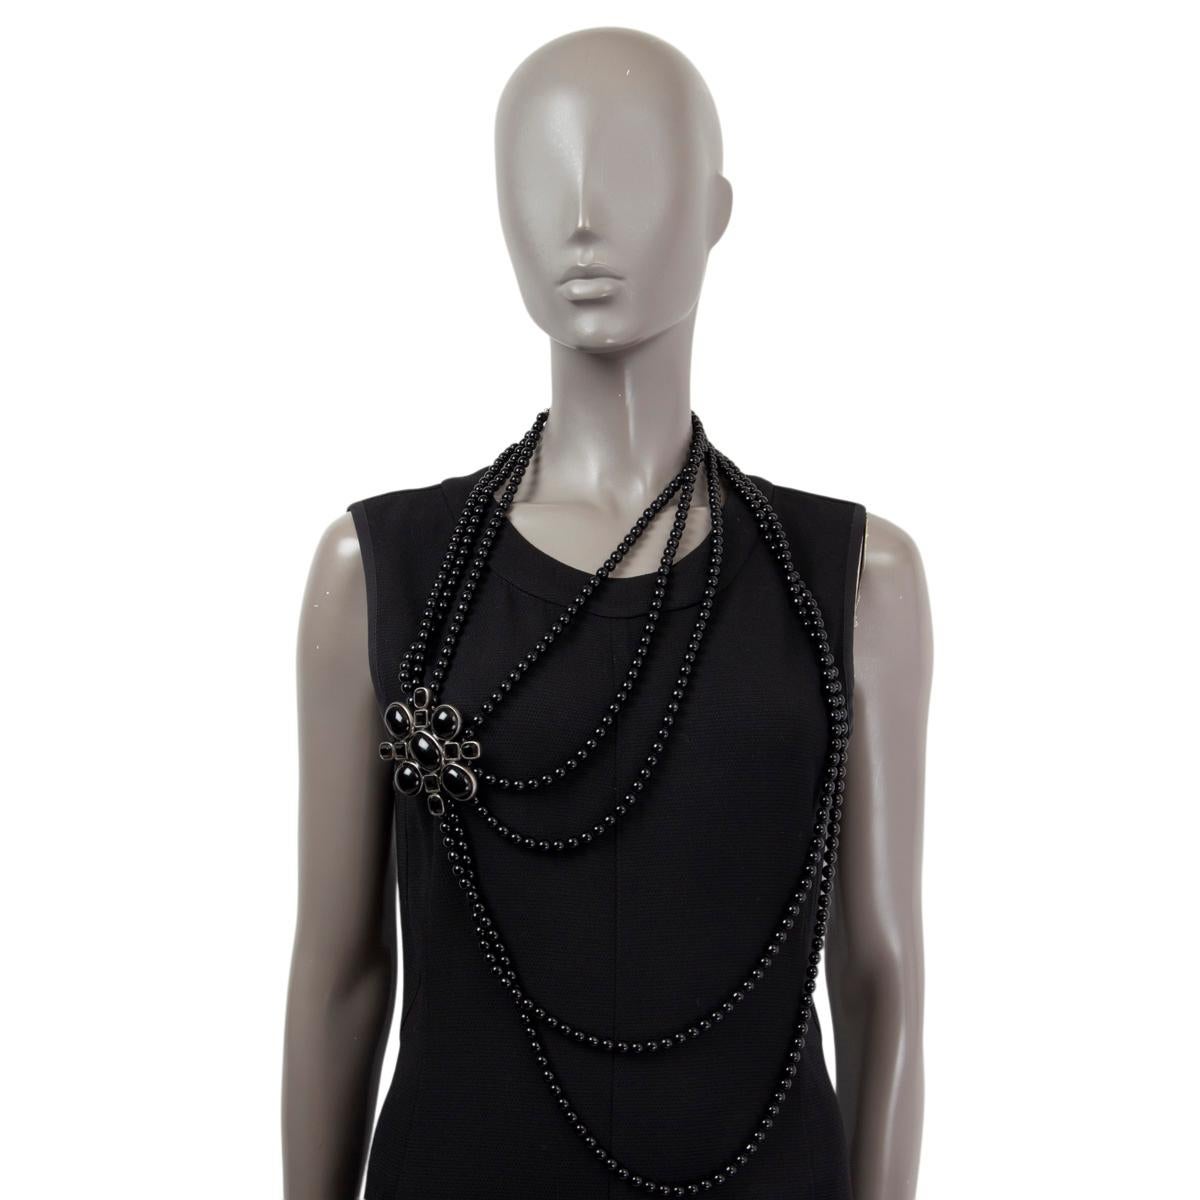 100% authentic Chanel 2005 long faux pearl and beaded necklace in black with brooch pendant made of black stones. Can be worn as a necklace or belt. Has been worn and is in excellent condition. 

Measurements
Model	Chanel05P
Width	7cm